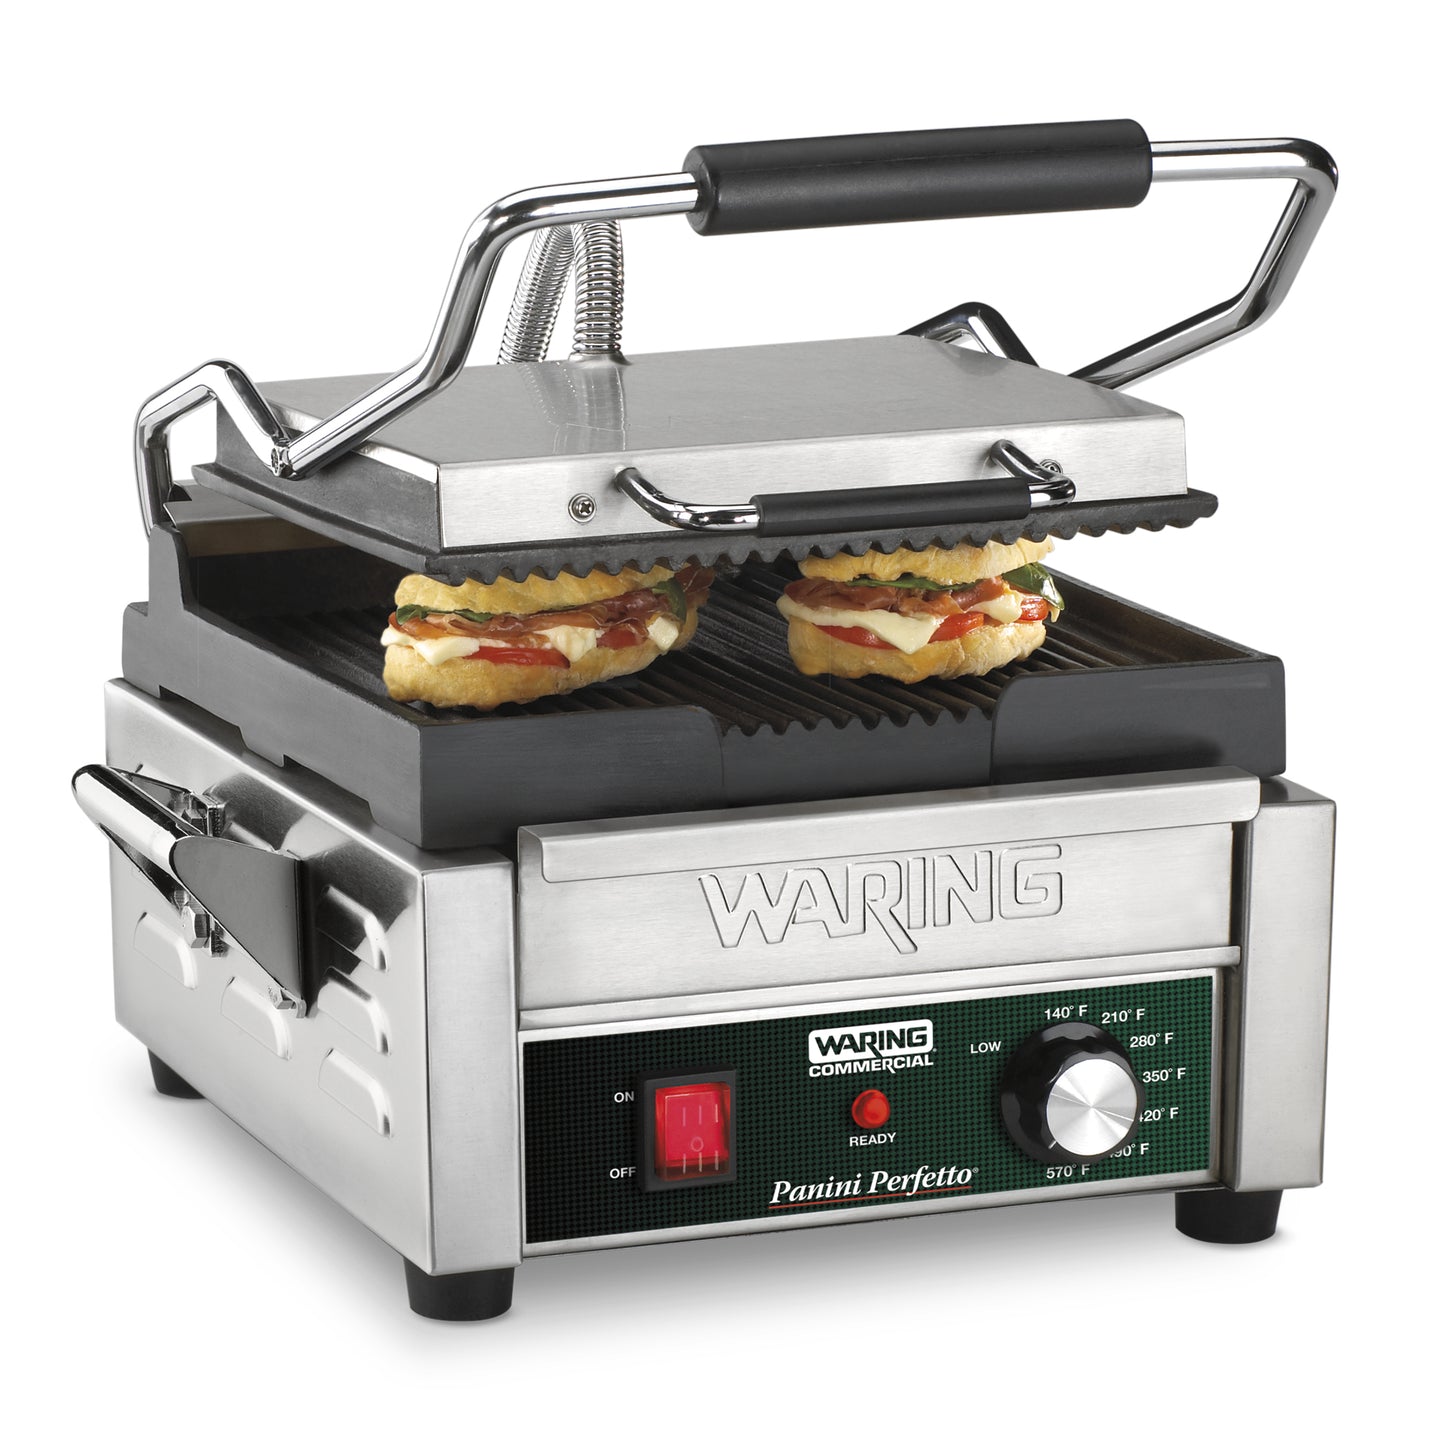 Waring WPG150 Panini Perfetto® Compact Panini Grill — 120V (9.75" x 9.25" cooking surface)